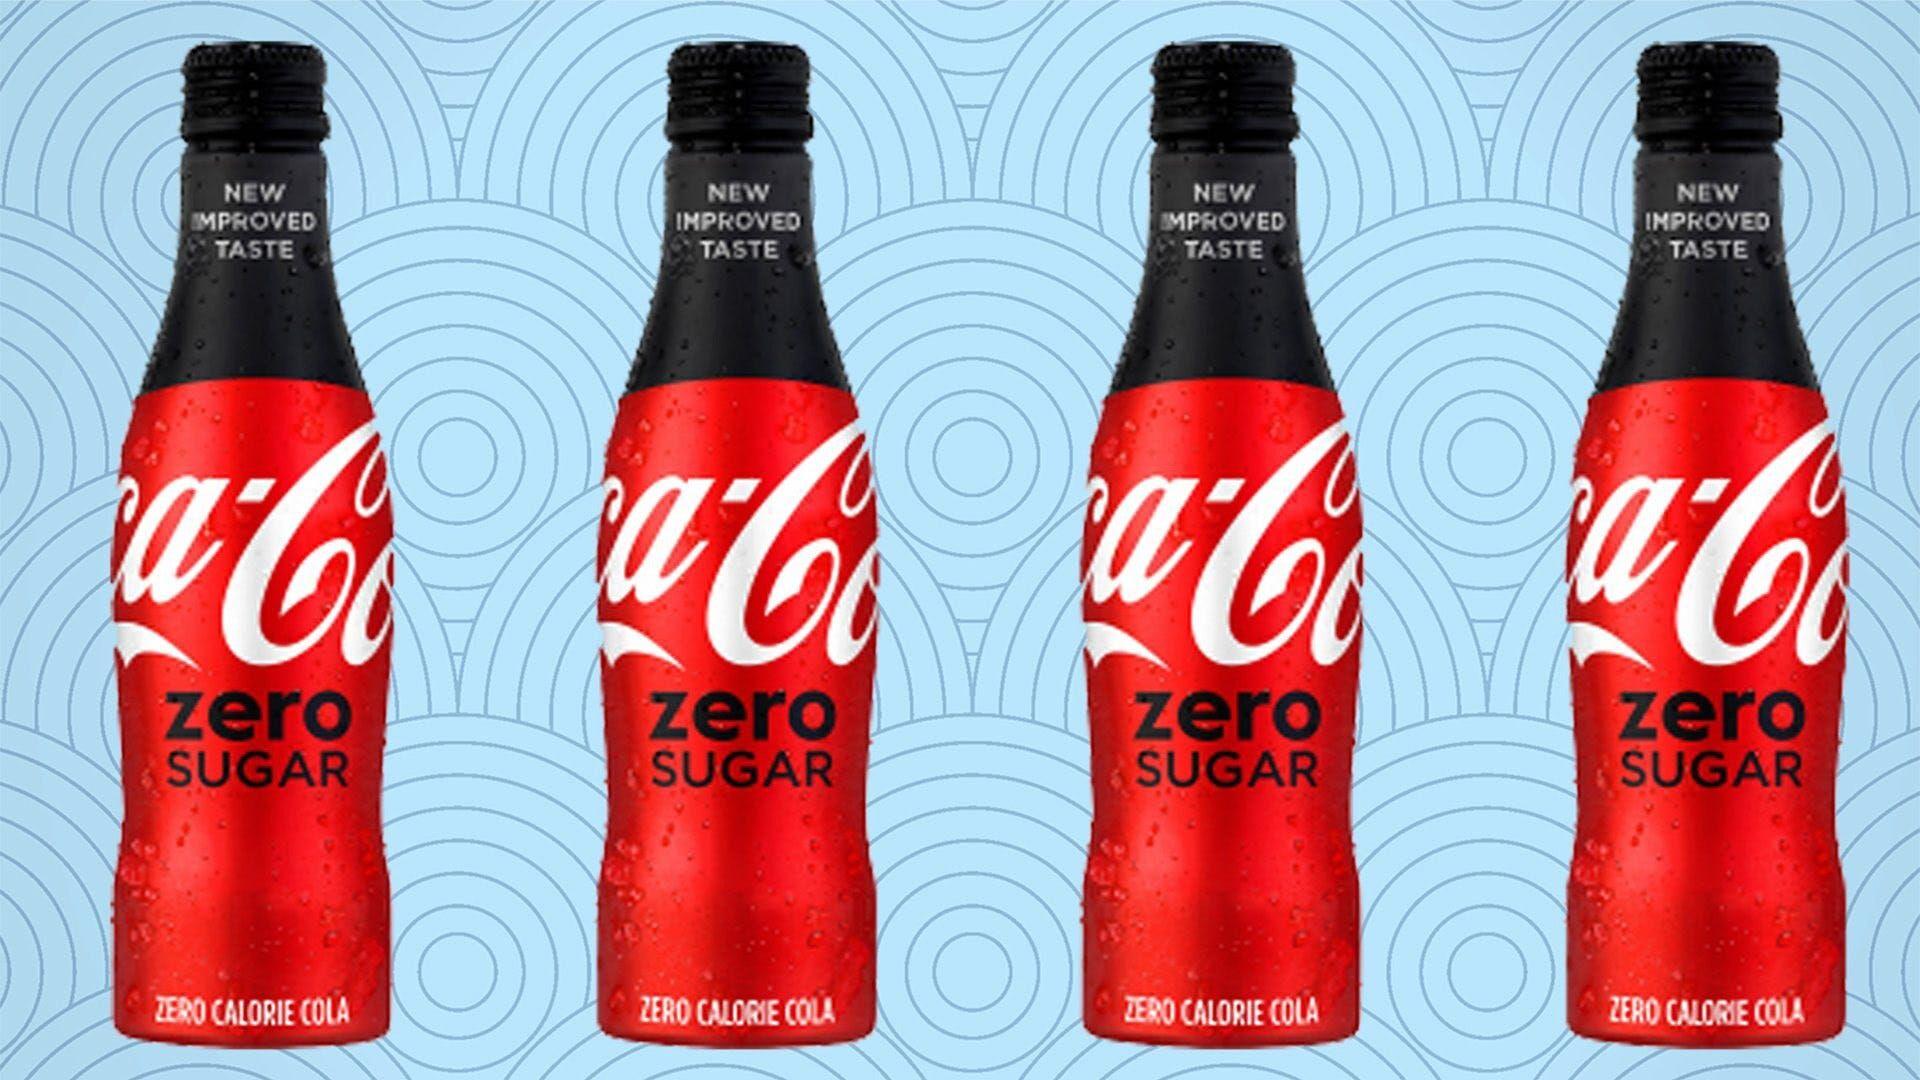 Coke and Diet Coke are getting more expensive. Here's why